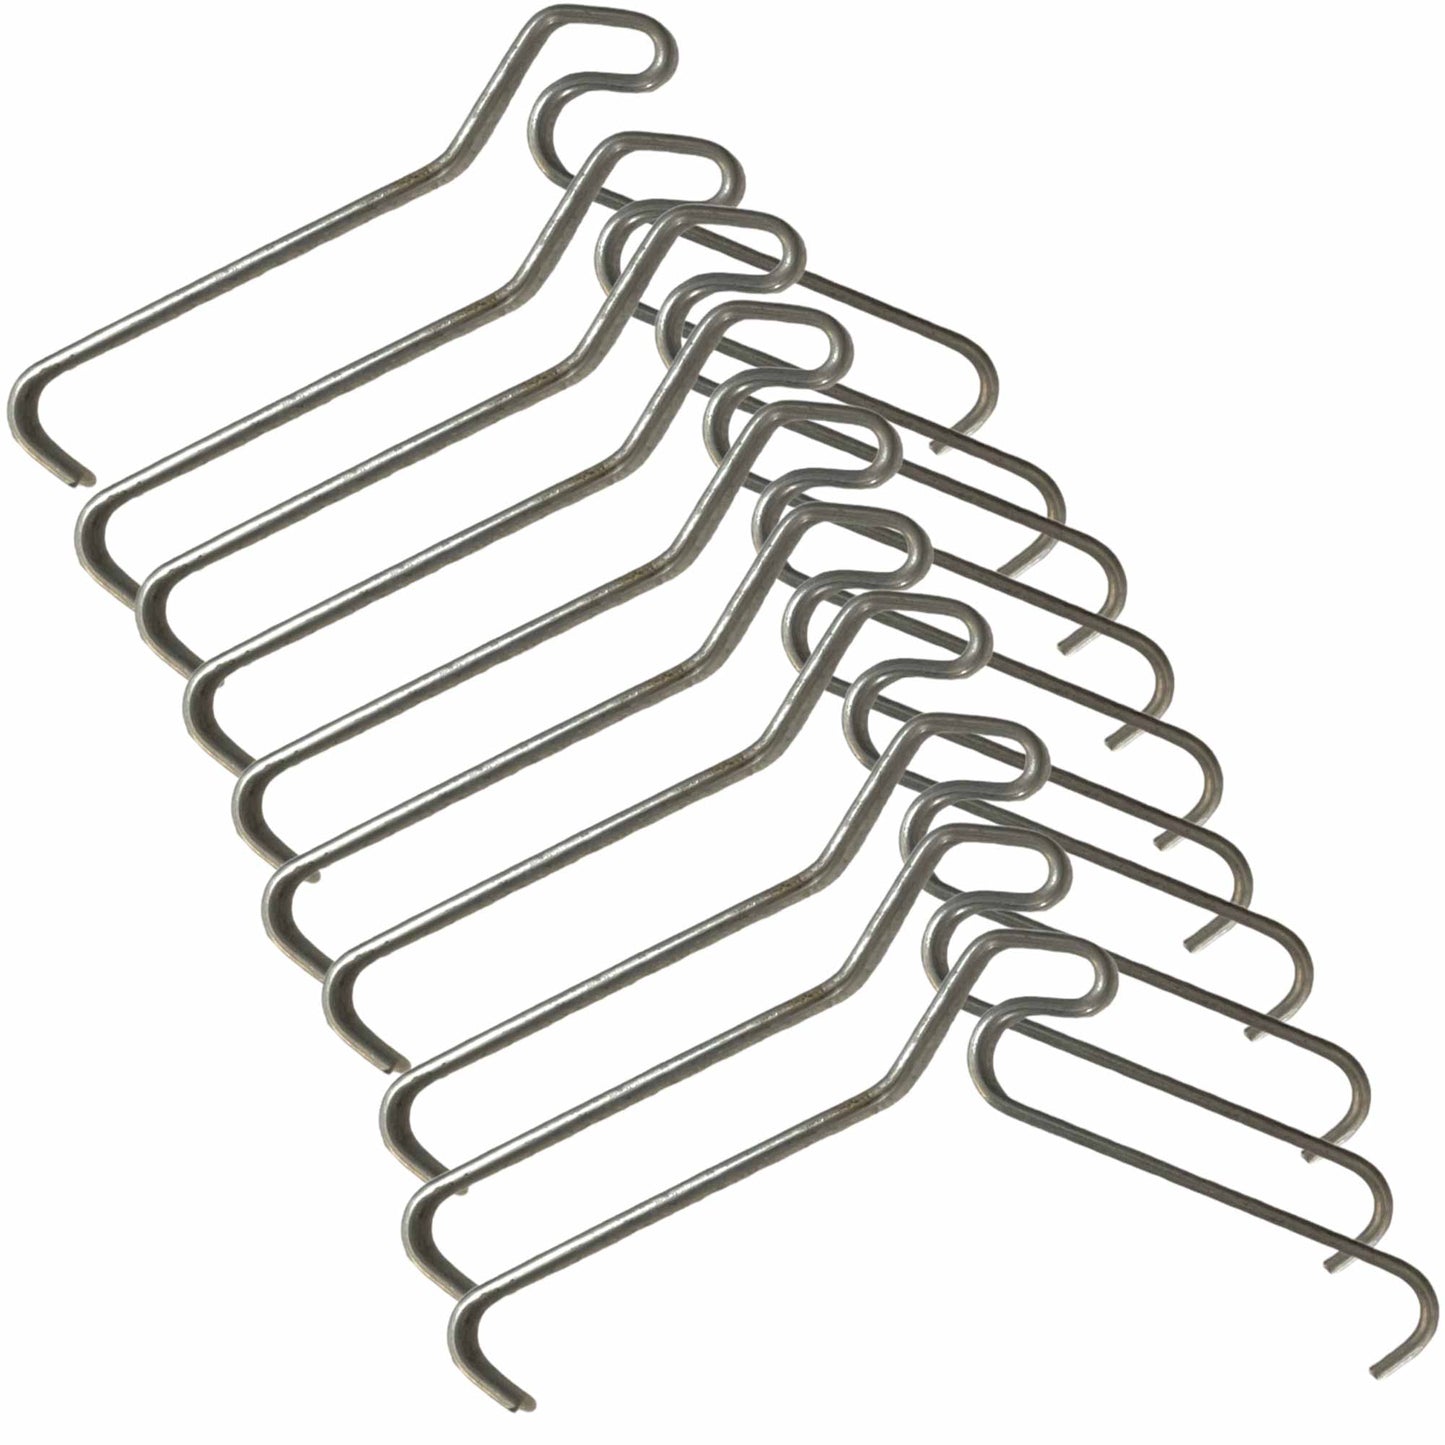 10 Pack 70mm (2.7") Brick Hooks - Wall Crab Clips Hangers For Pictures Plants